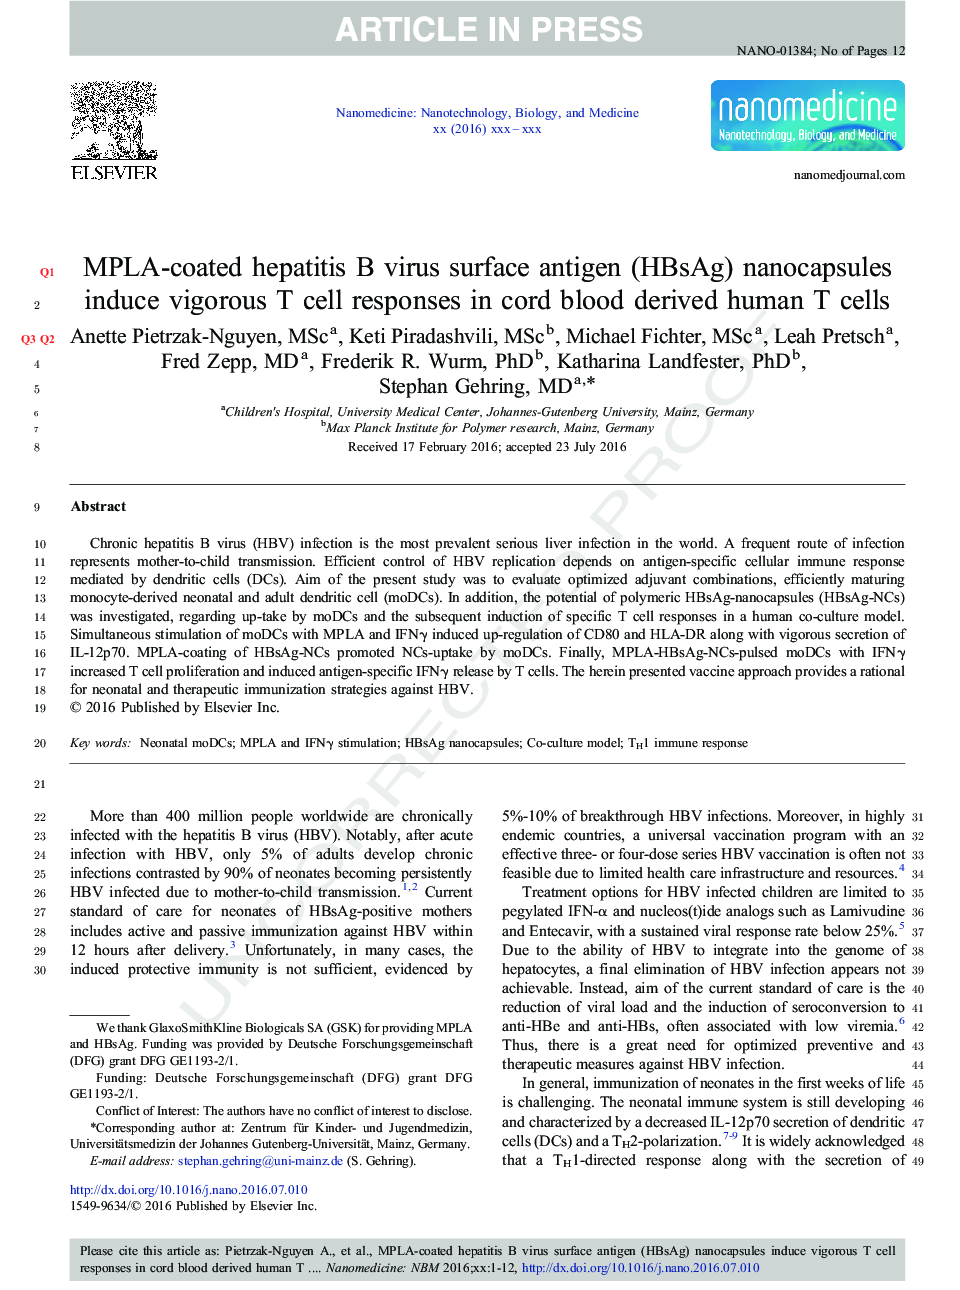 MPLA-coated hepatitis B virus surface antigen (HBsAg) nanocapsules induce vigorous T cell responses in cord blood derived human T cells